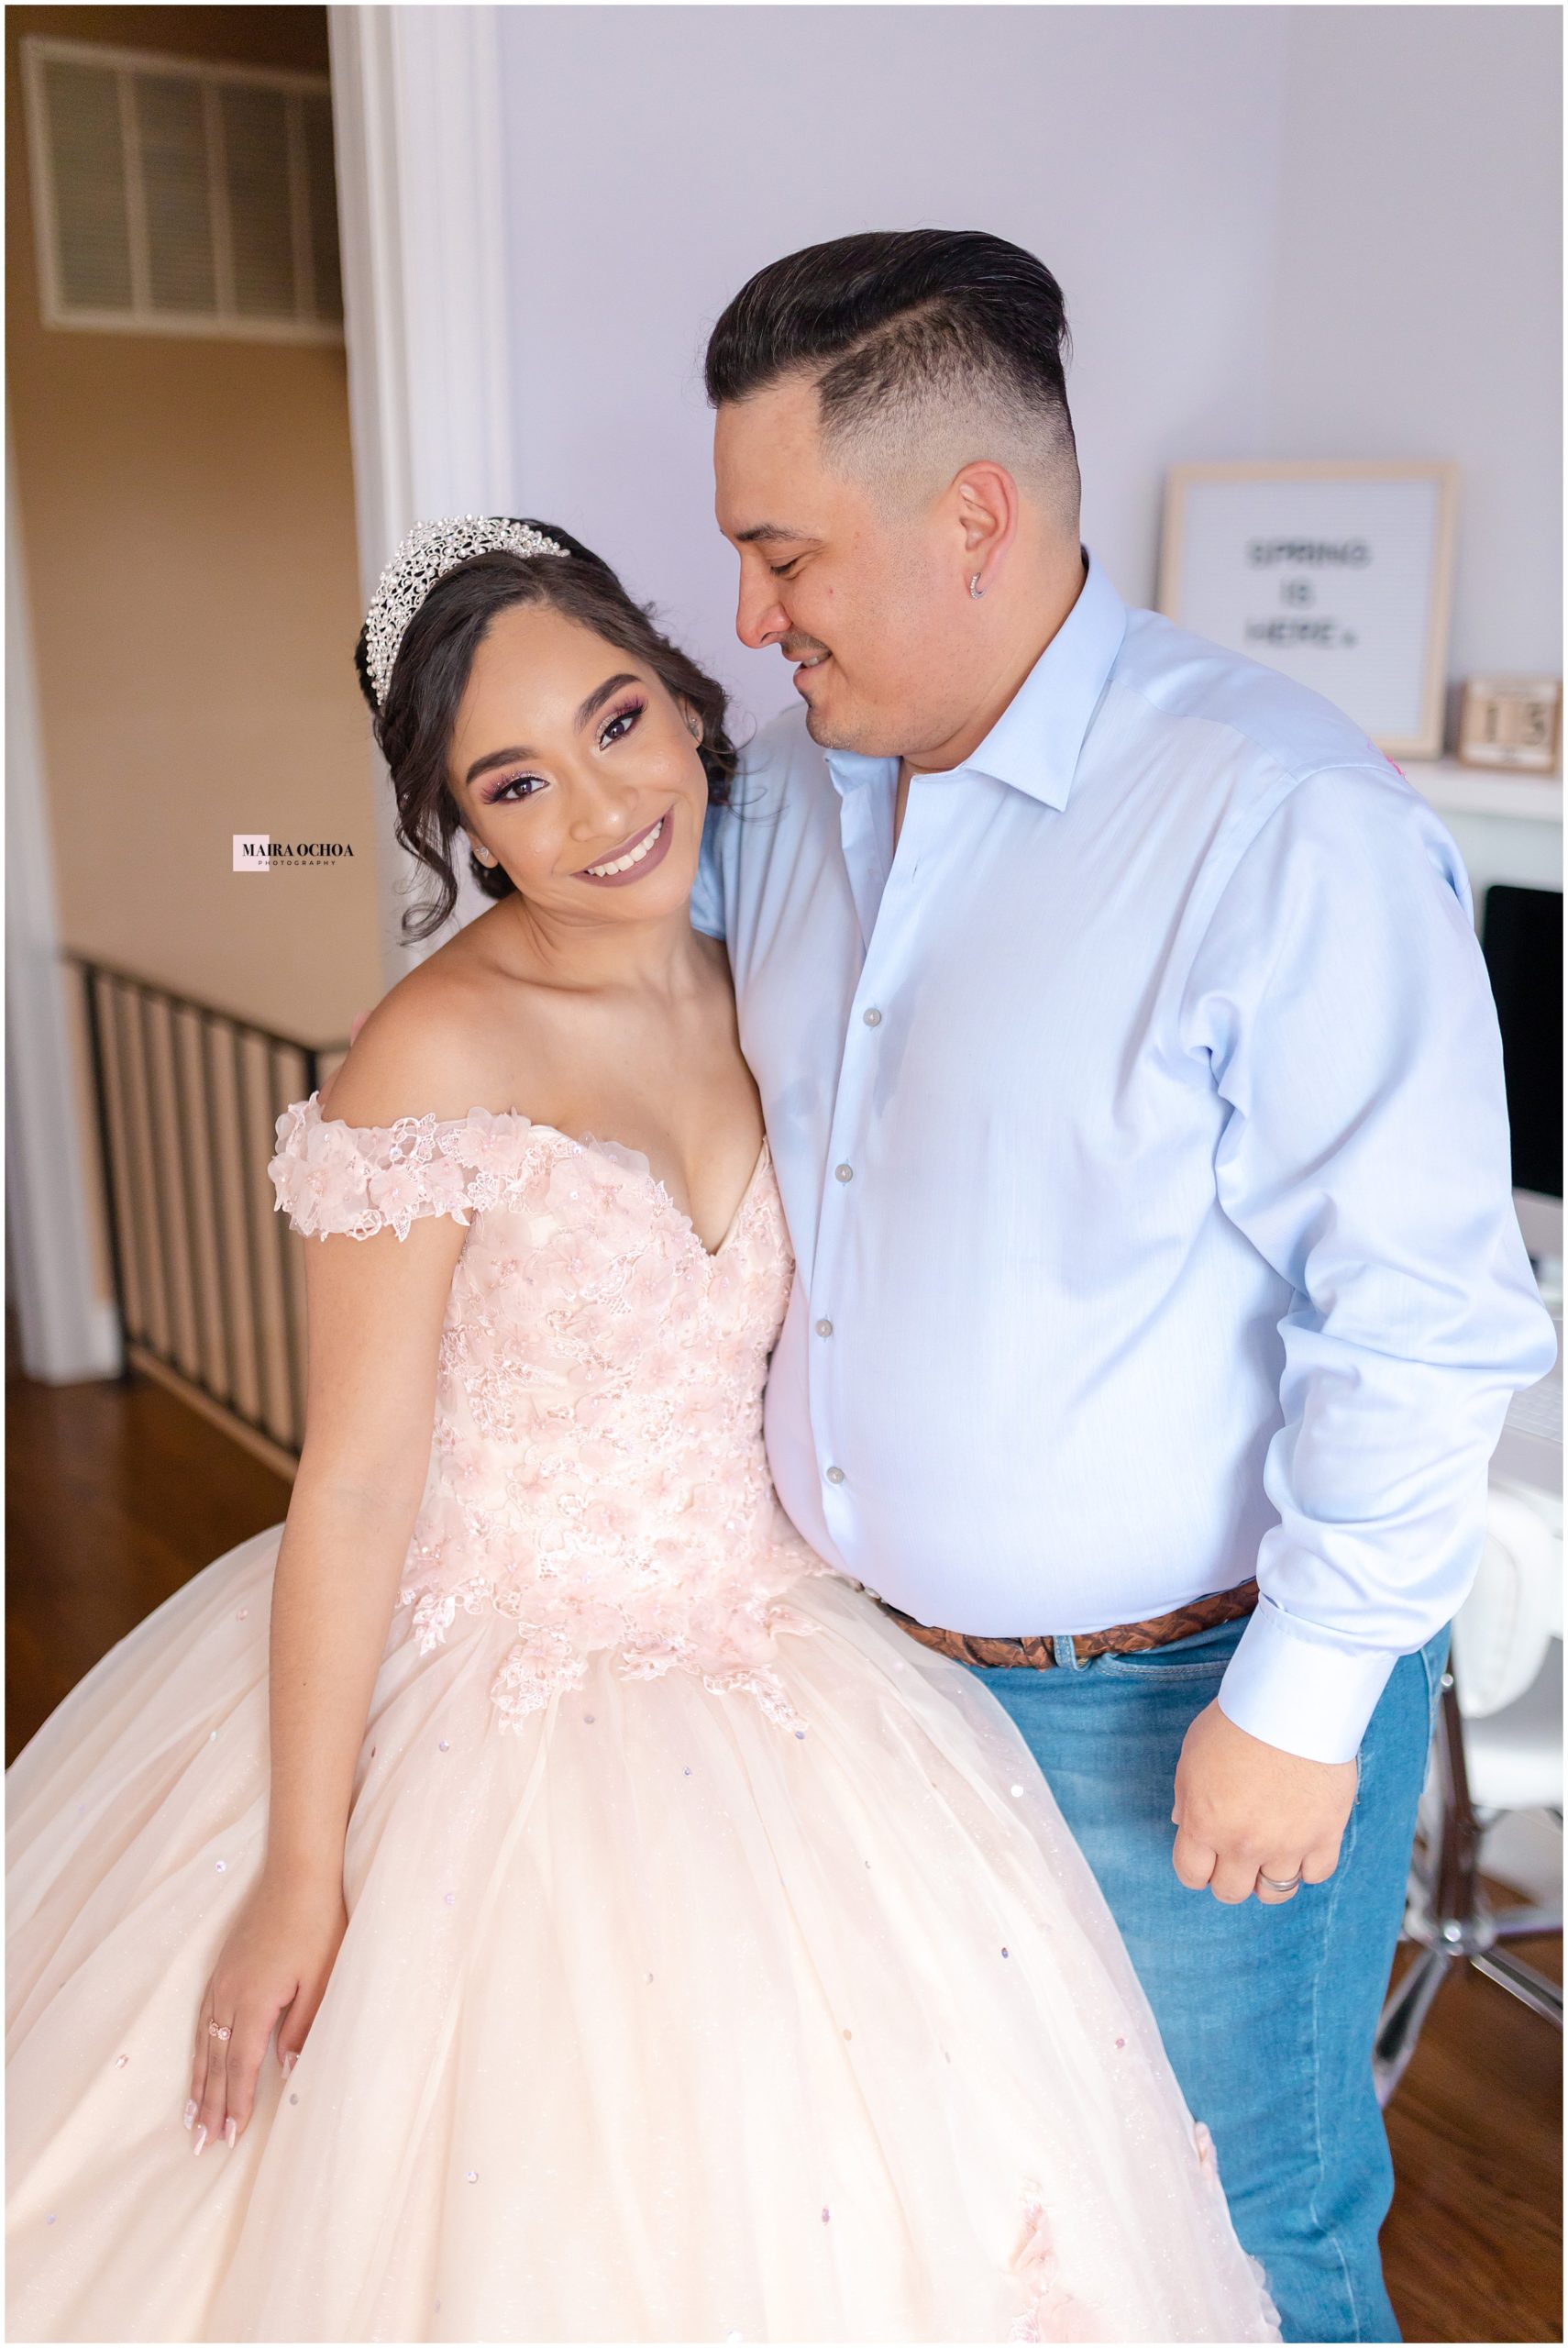 Quinceanera and dad at home in room